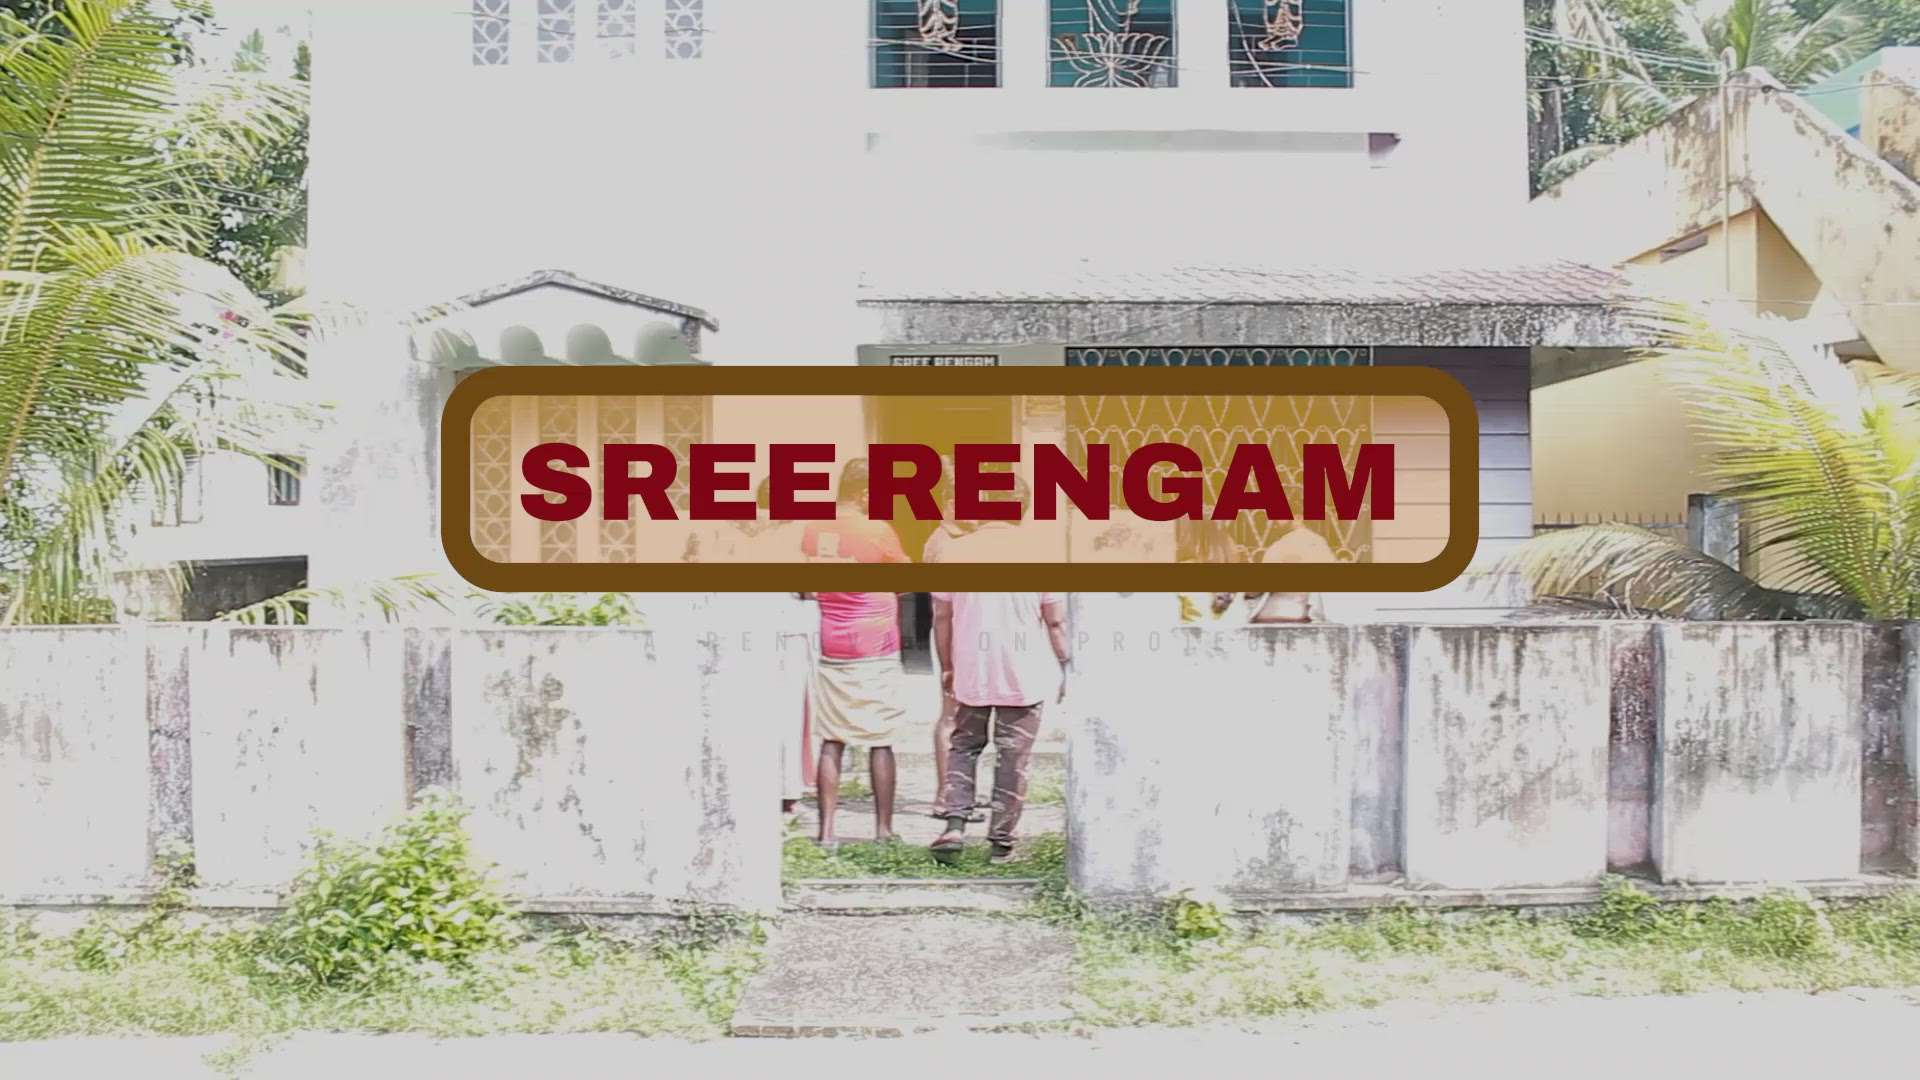 Sree Rengam Renovation Part 1

Contact us at +918055234222 for 3d designing, interior and exterior modelling and designing and construction works. 

 #HouseRenovation  #constructionsite  #constructioncompany  #ivoeryhomes  #ivoeryhomesanddevelopers